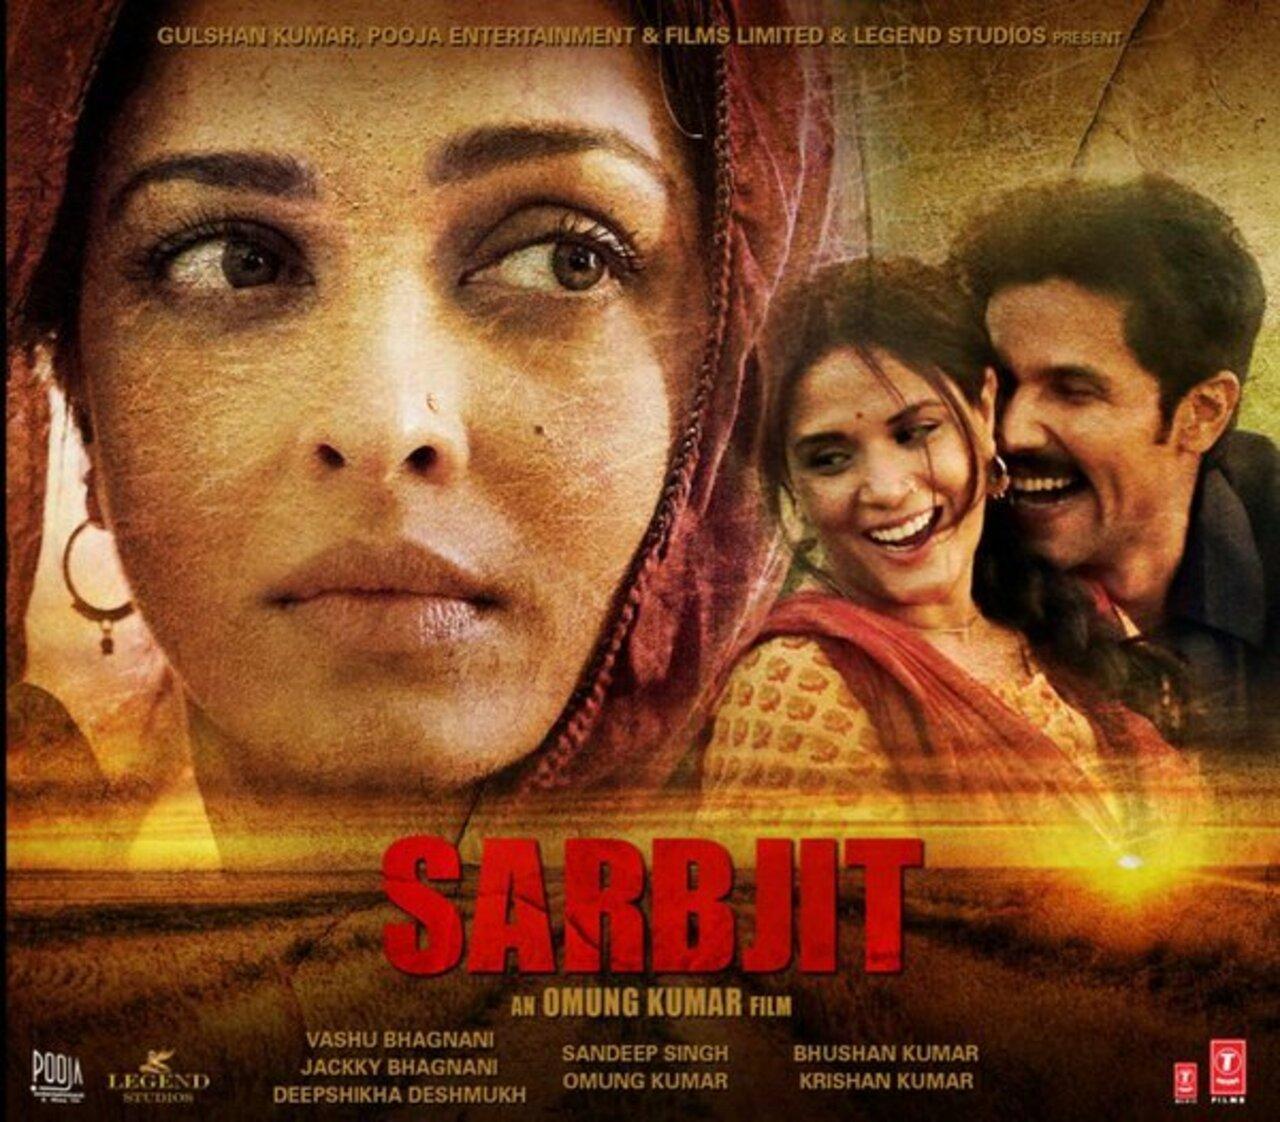 In the movie, the brother-sister bond between Sarabjit (played by Randeep Hooda) and Dalbir (played by Aishwarya Rai Bachchan) is a central theme. Dalbir is portrayed as a determined and fierce sister who leaves no stone unturned to prove her brother's innocence and secure his release from the Pakistani prison